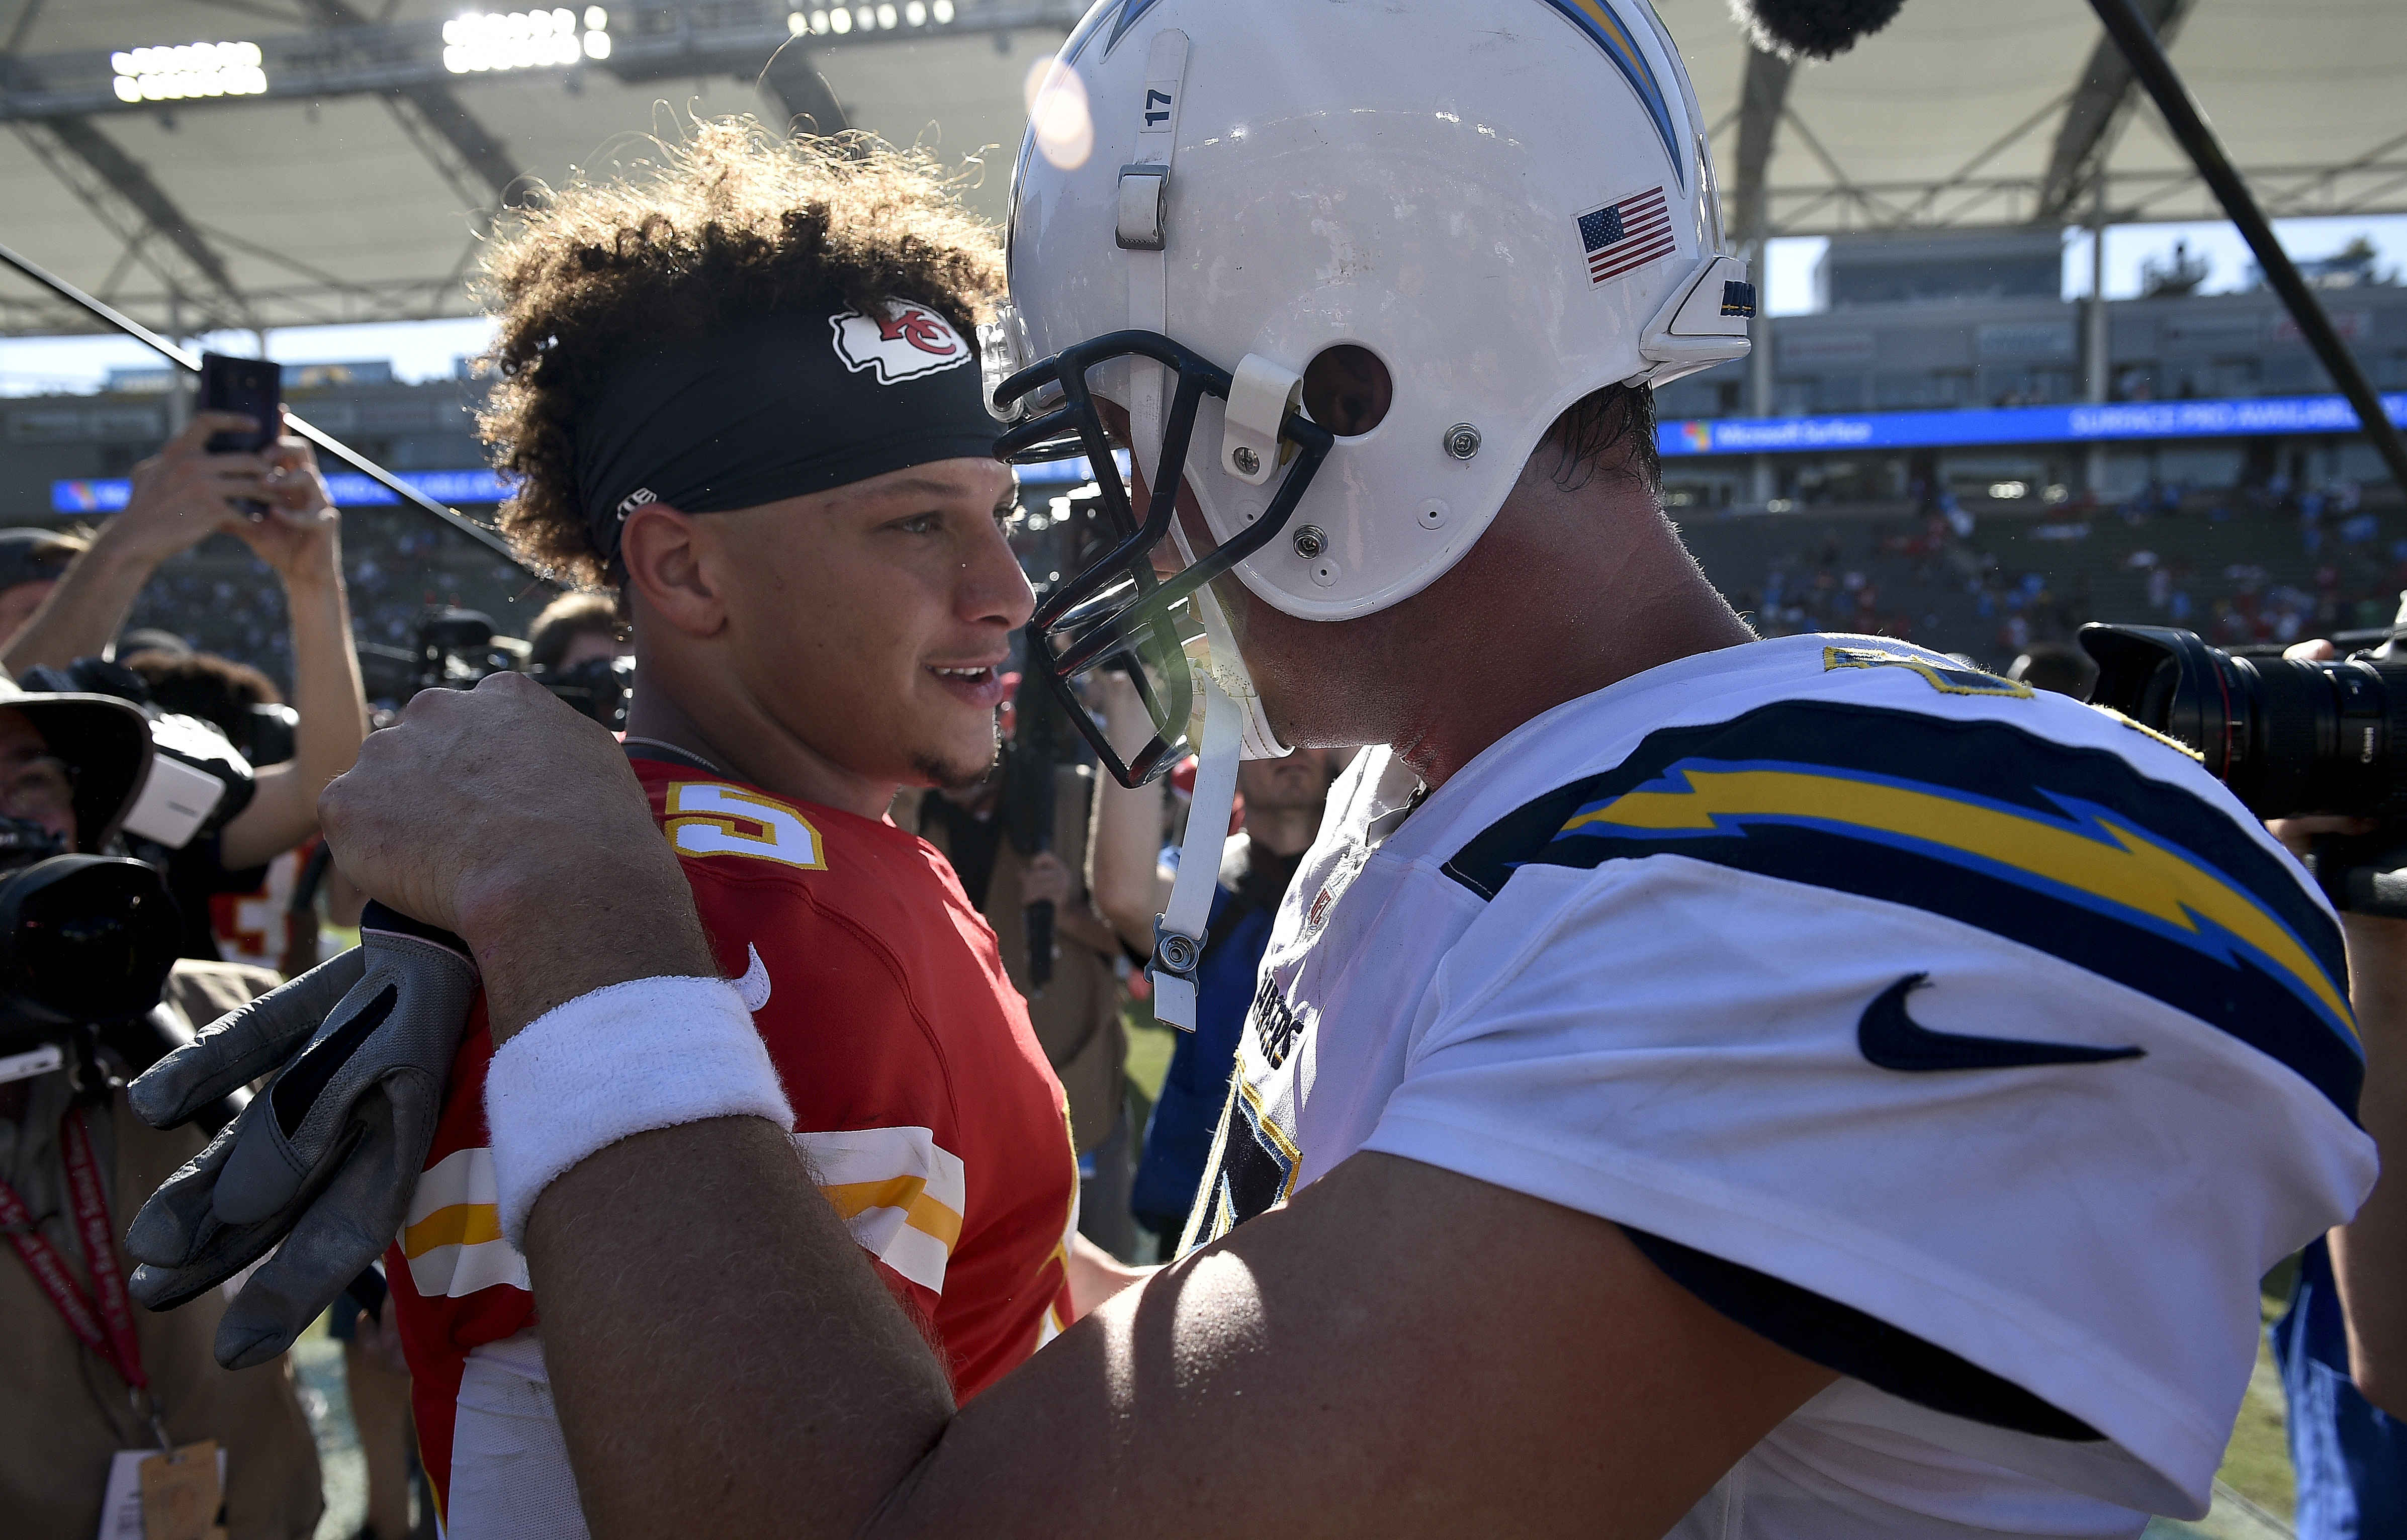 Rivers impressed as Mahomes sizzles for 4 TDs in Chiefs' win